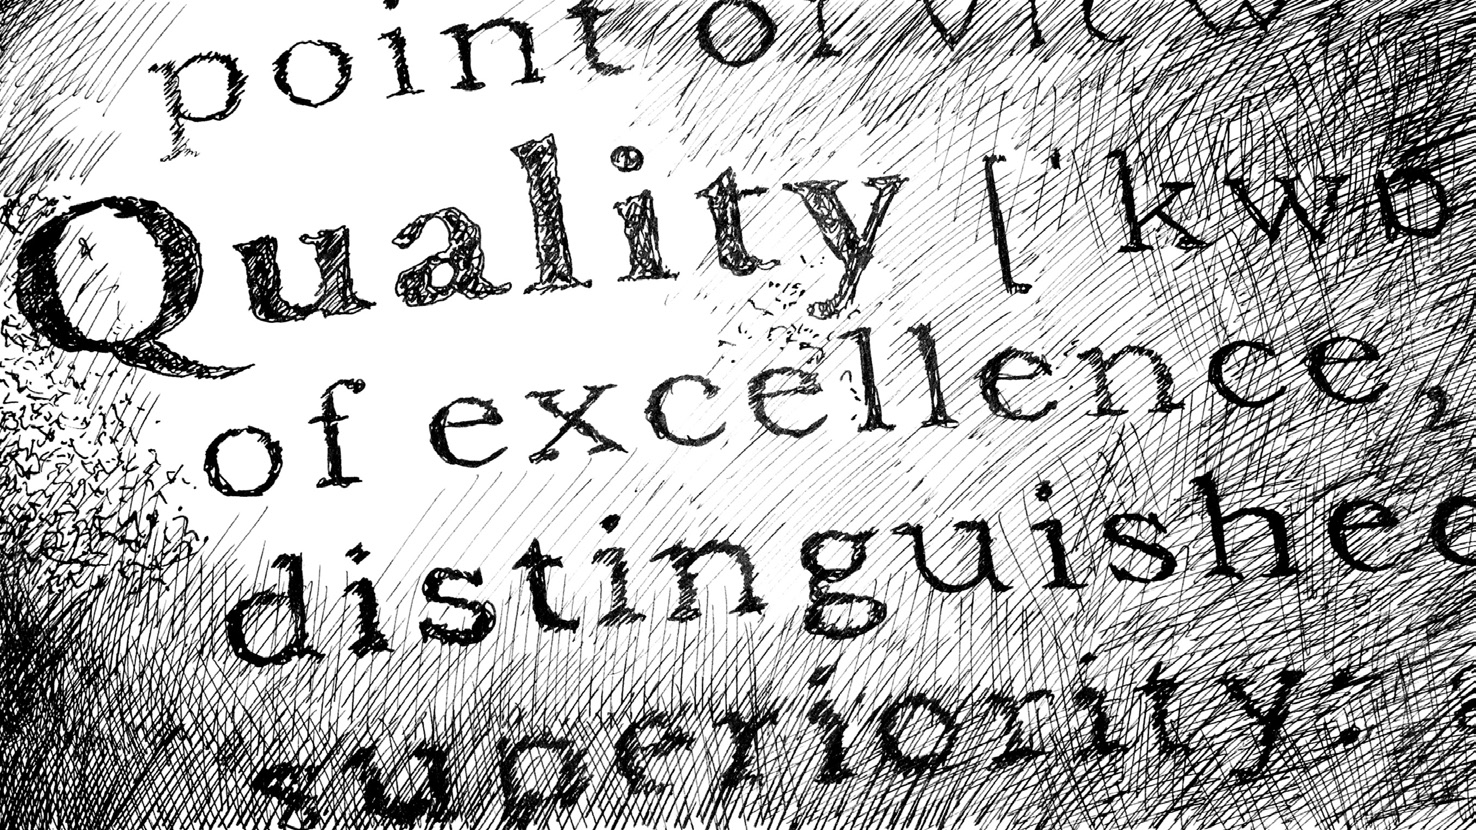 The word "quality" is bolded in a kind of dictionary.